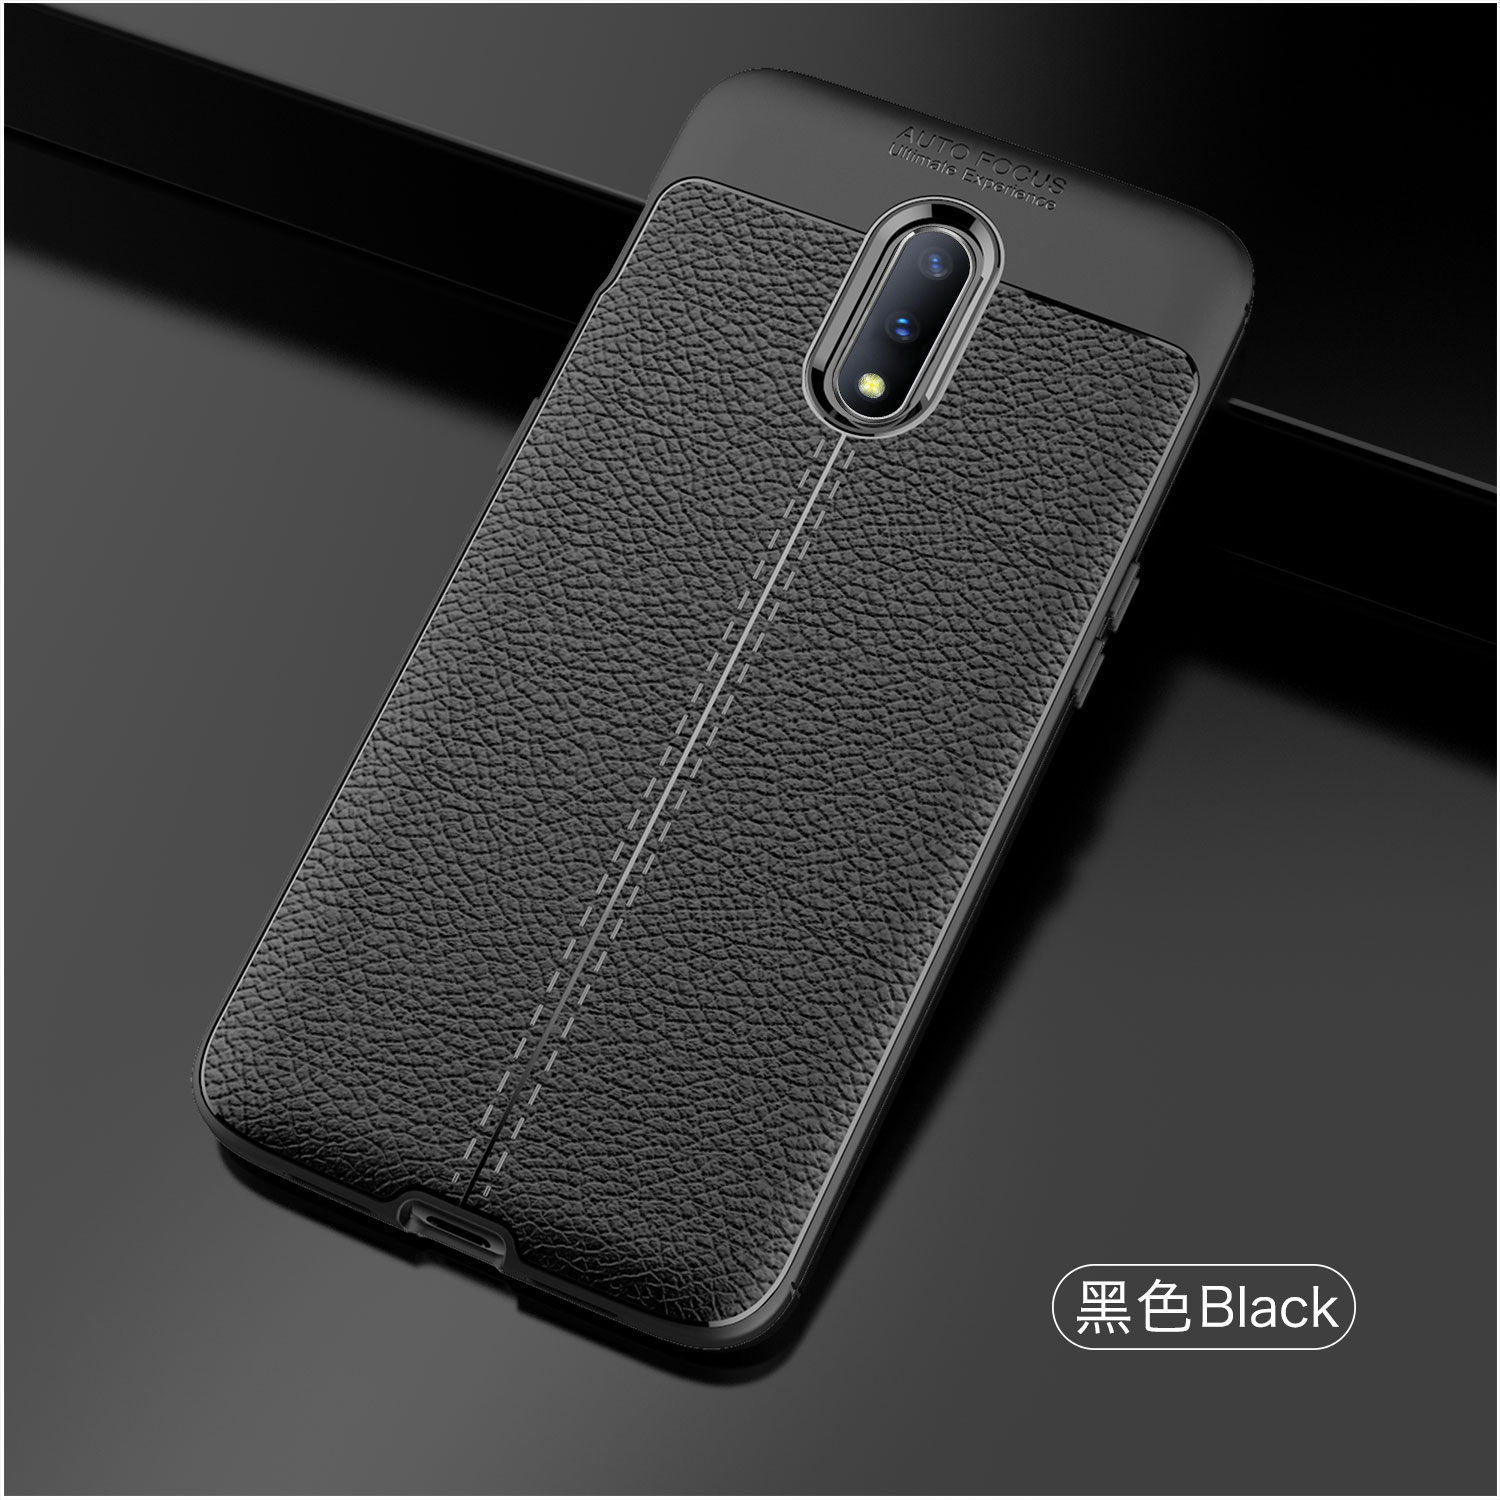 Bakeey-Anti-Fingerprint-Soft-Litchi-Texture-Silicone-Protective-Case-For-OnePlus-7-1500128-11